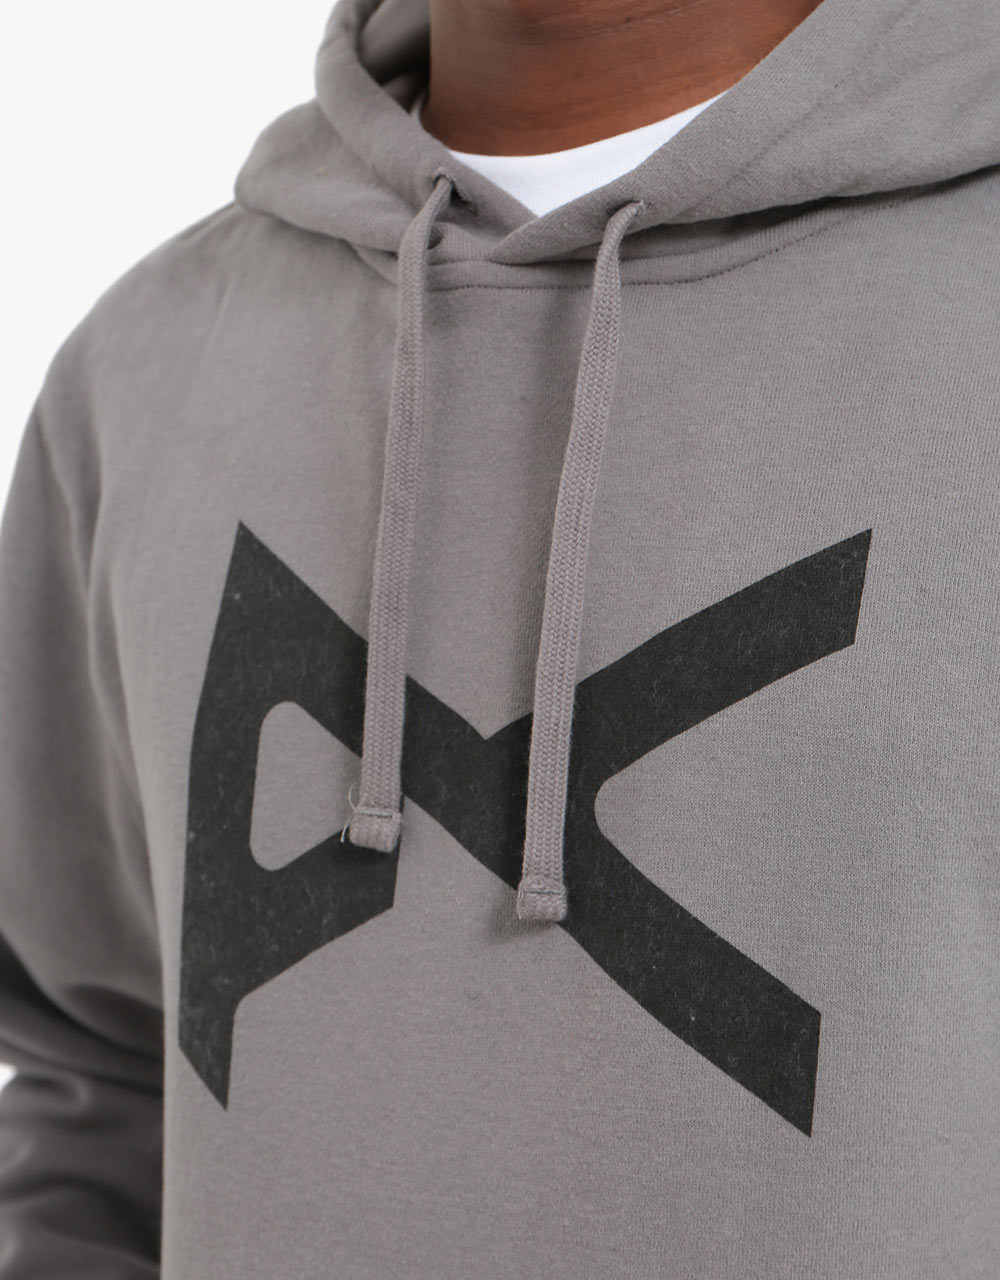 Anon Logo Pullover Hoodie - Charcoal Grey